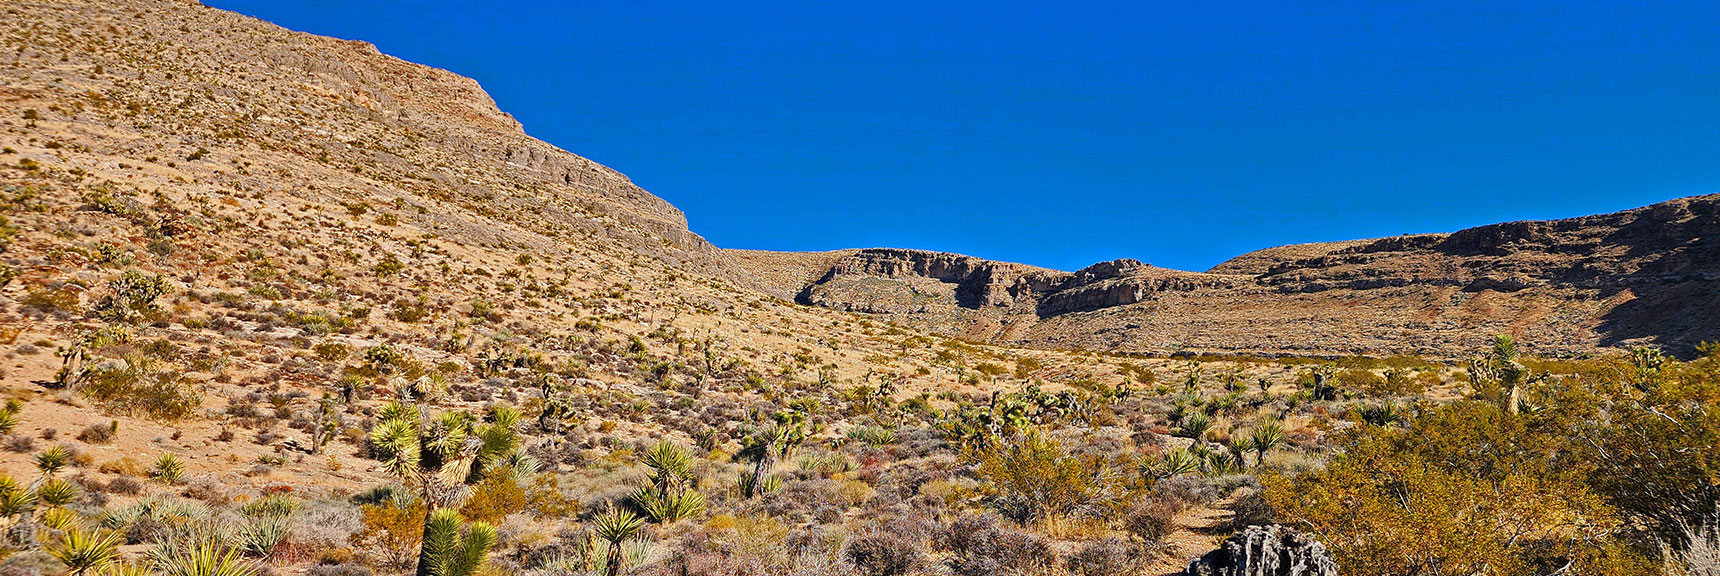 Next Comes Mule Spring Canyon. A Few Steeper Summit Approaches and a Beautiful Spring. | Landmark Bluff Circuit | Lovell Canyon, Nevada